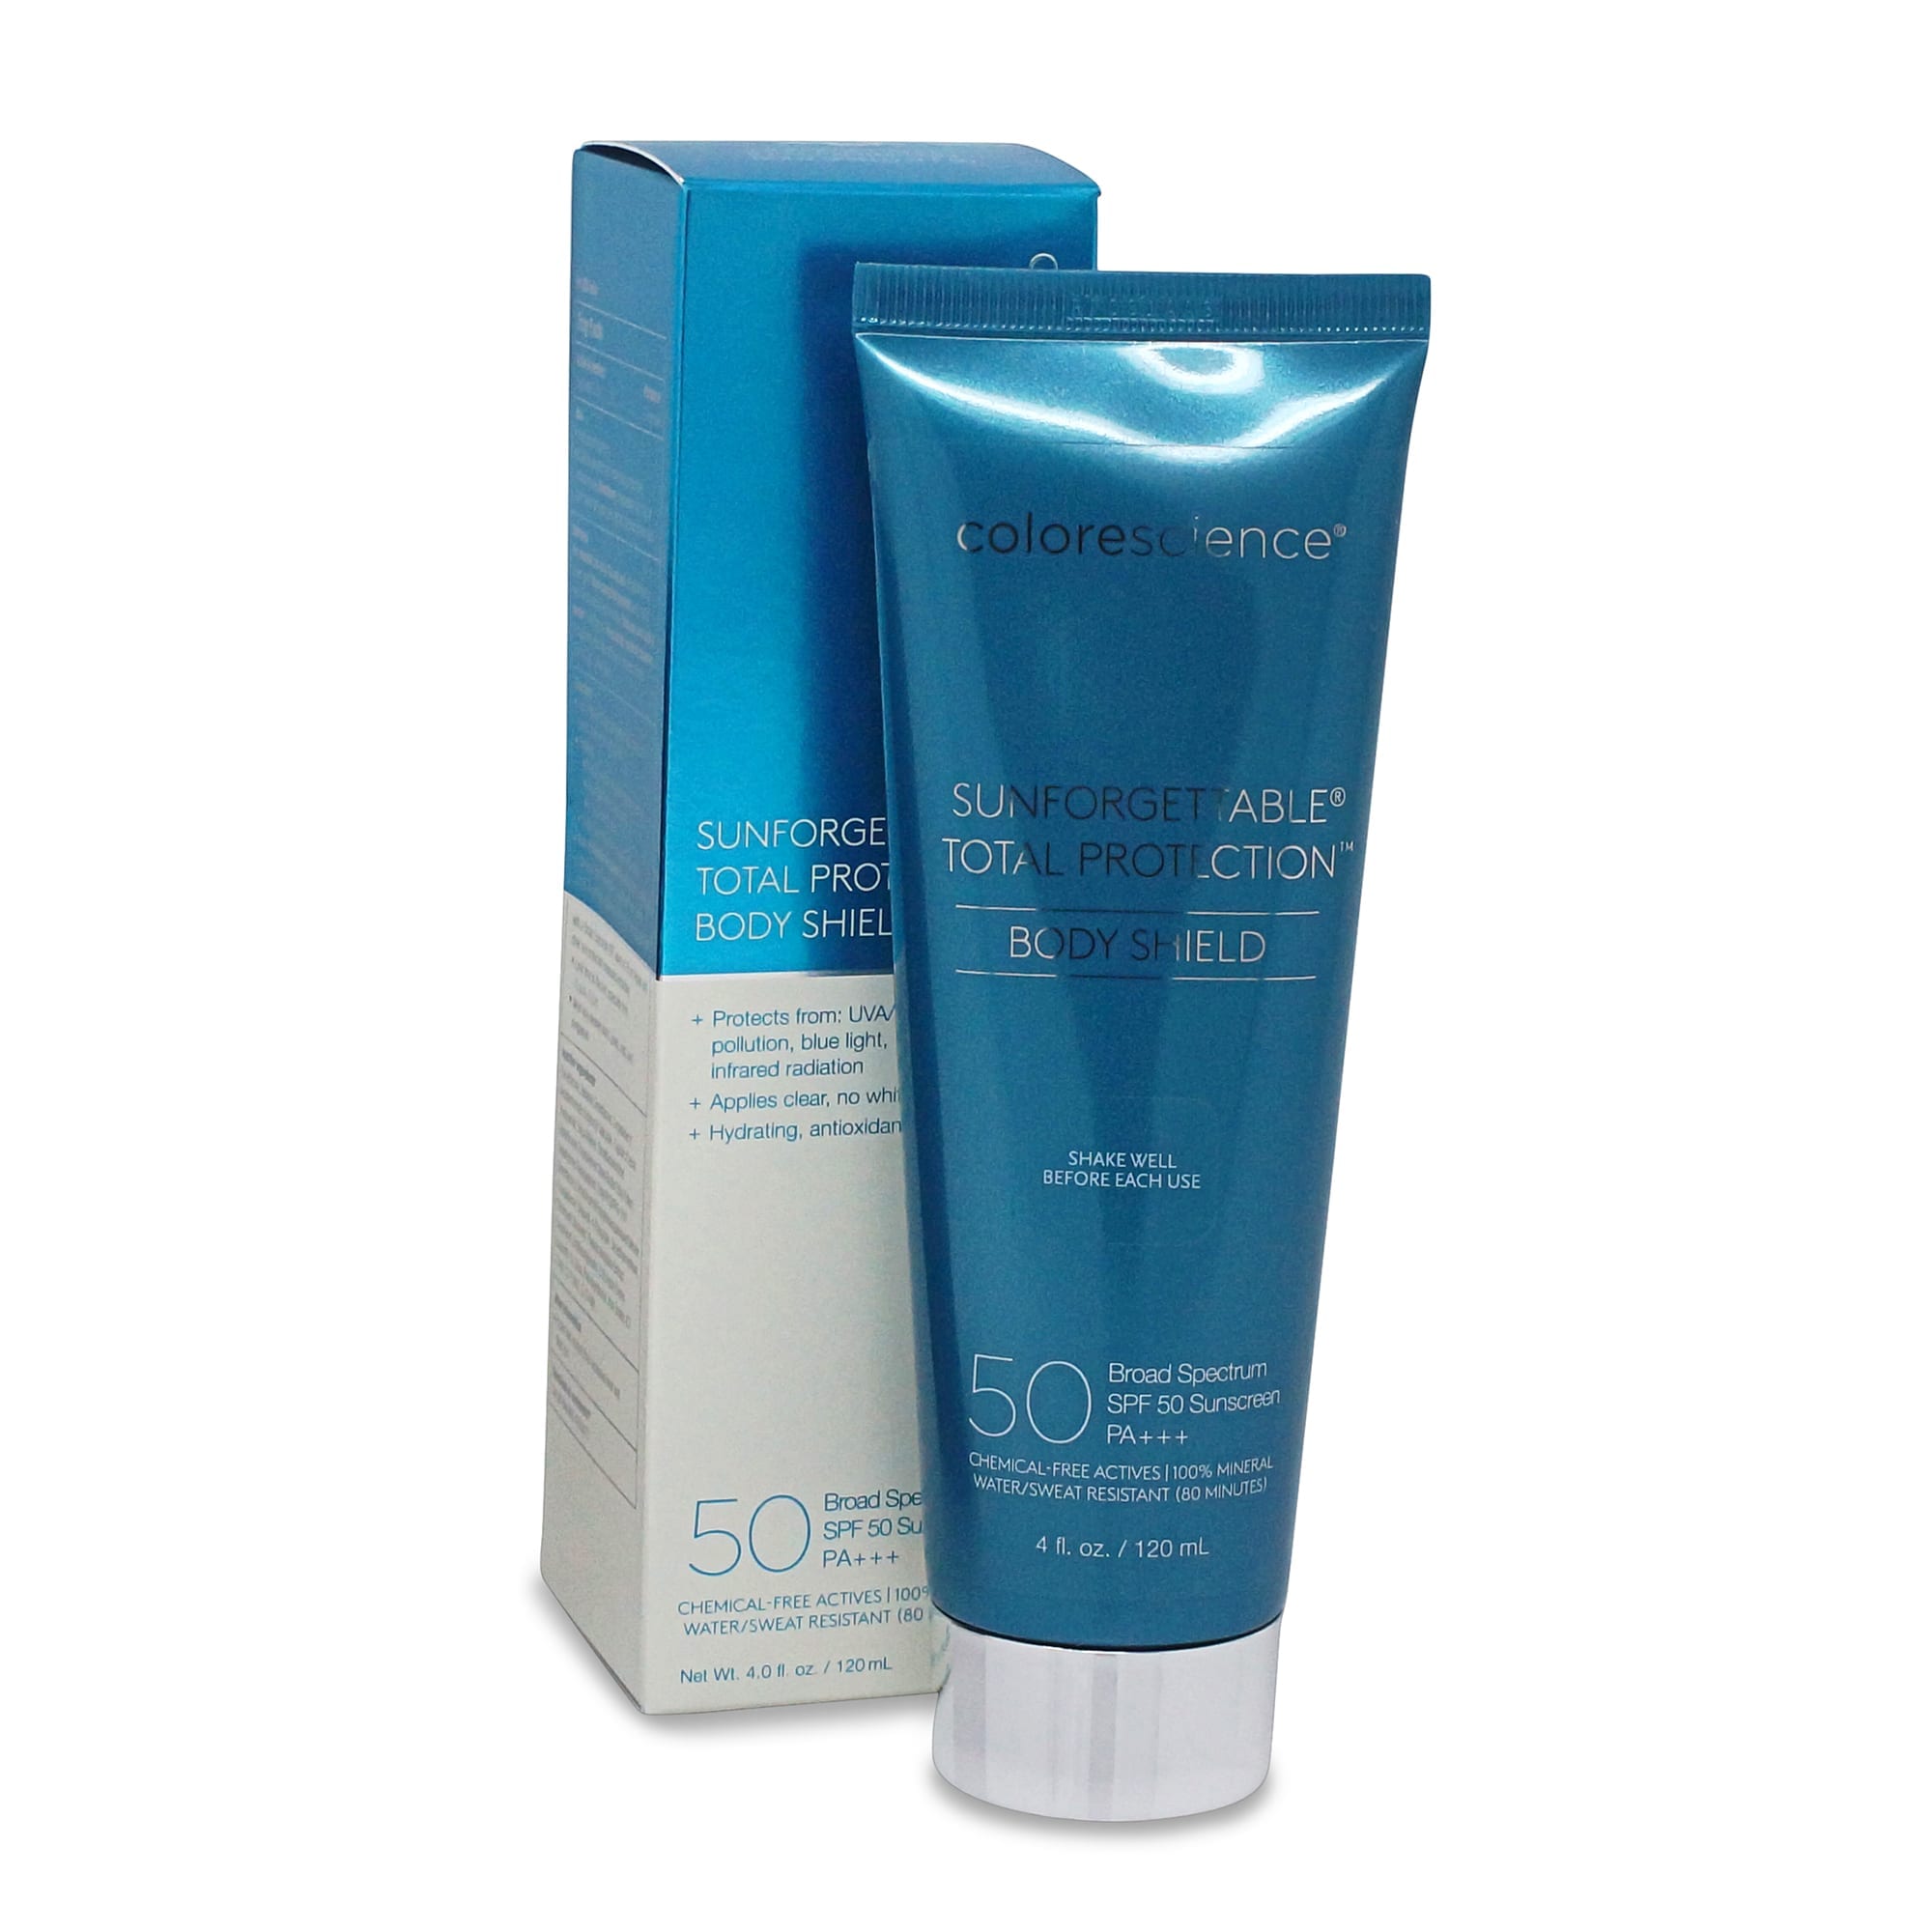 Soothing sunburn starts with prevention. Use Colorescience Sunforgettable Total Protection SPF 50 Bodyshield